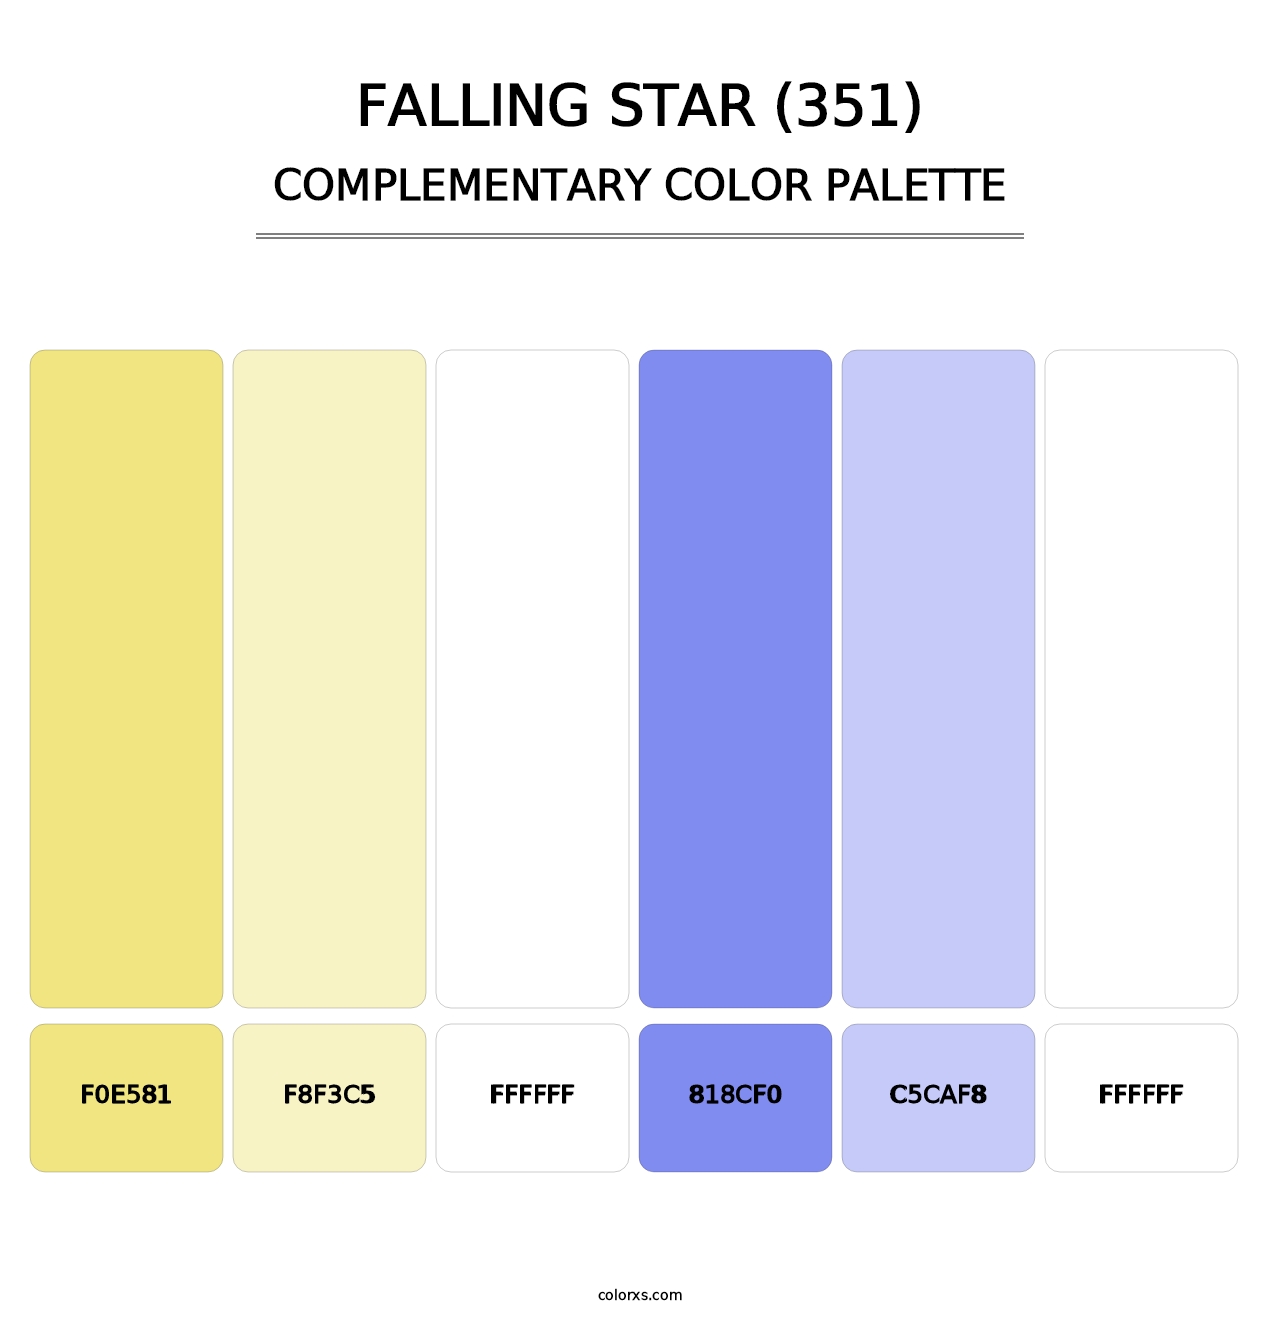 Falling Star (351) - Complementary Color Palette